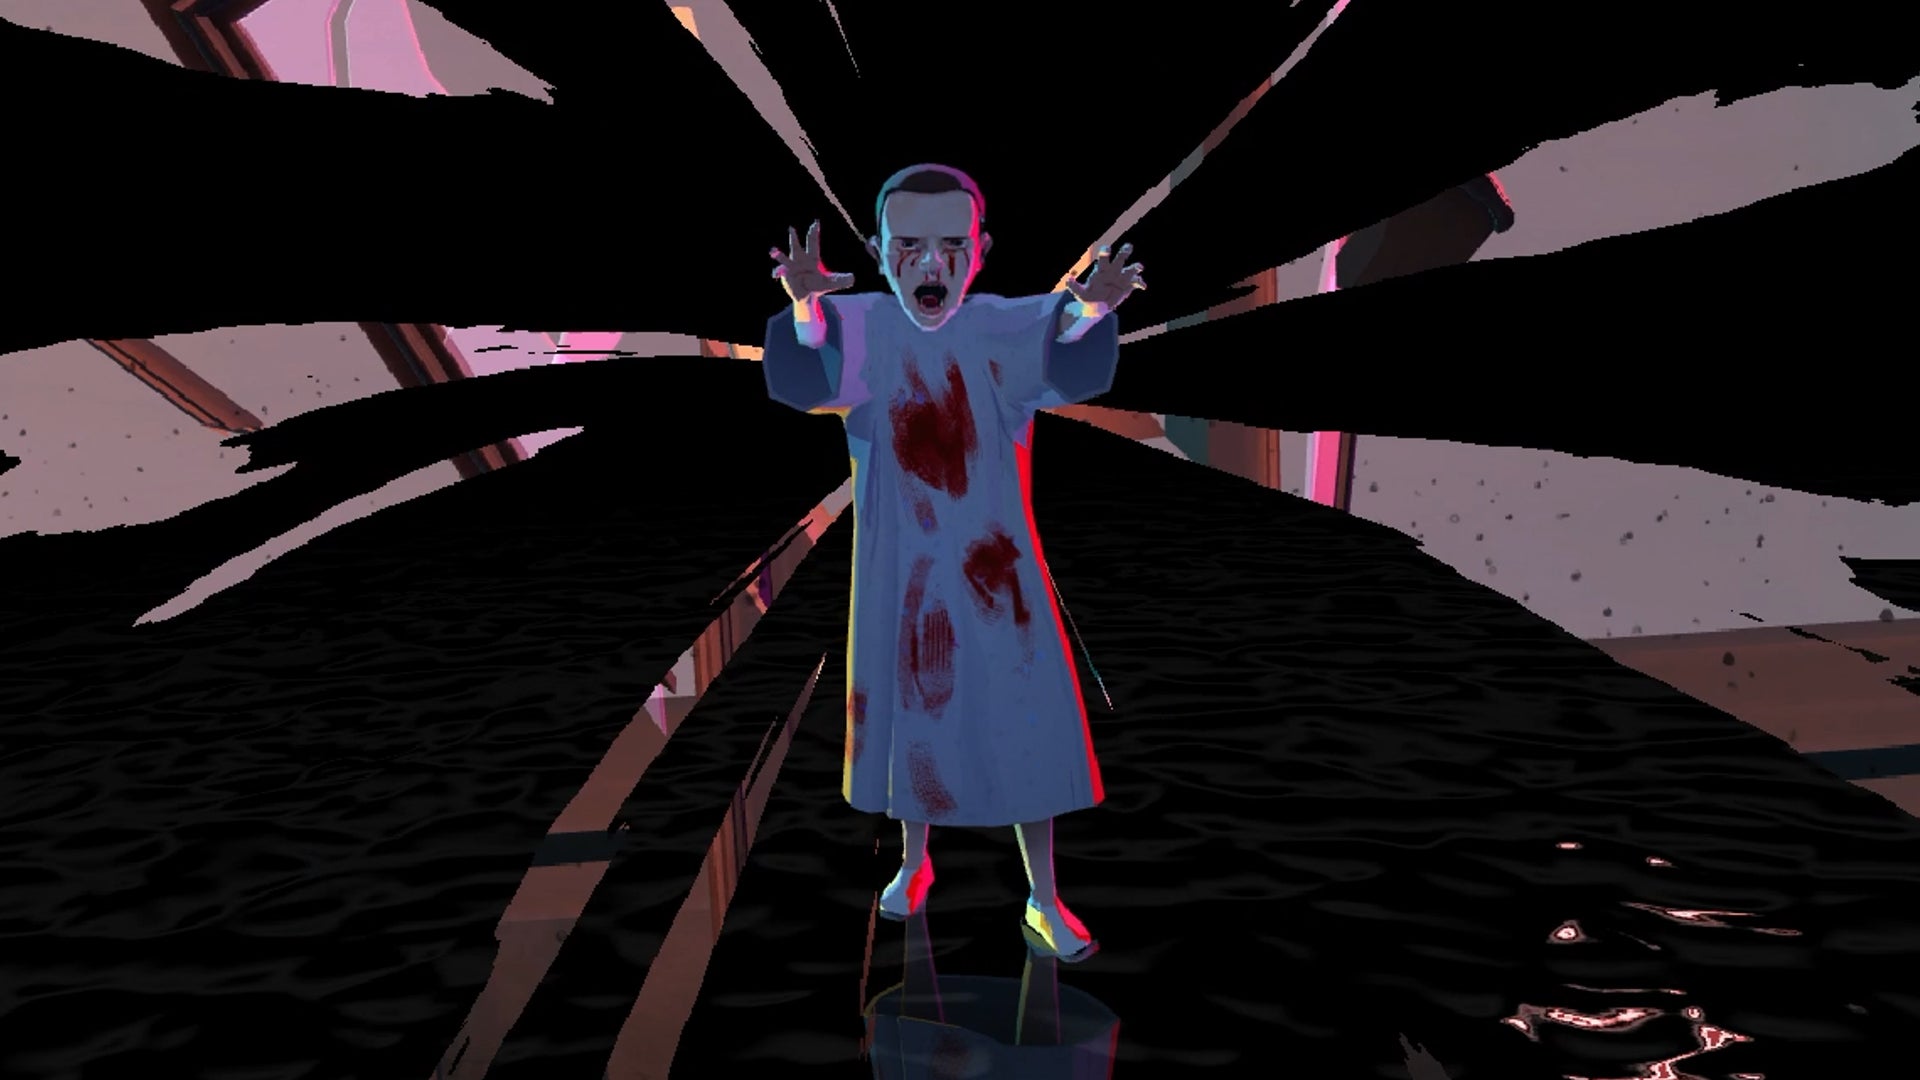 A screenshot showing Eleven from the upcoming Stranger Things VR game, set to release in winter 2023.